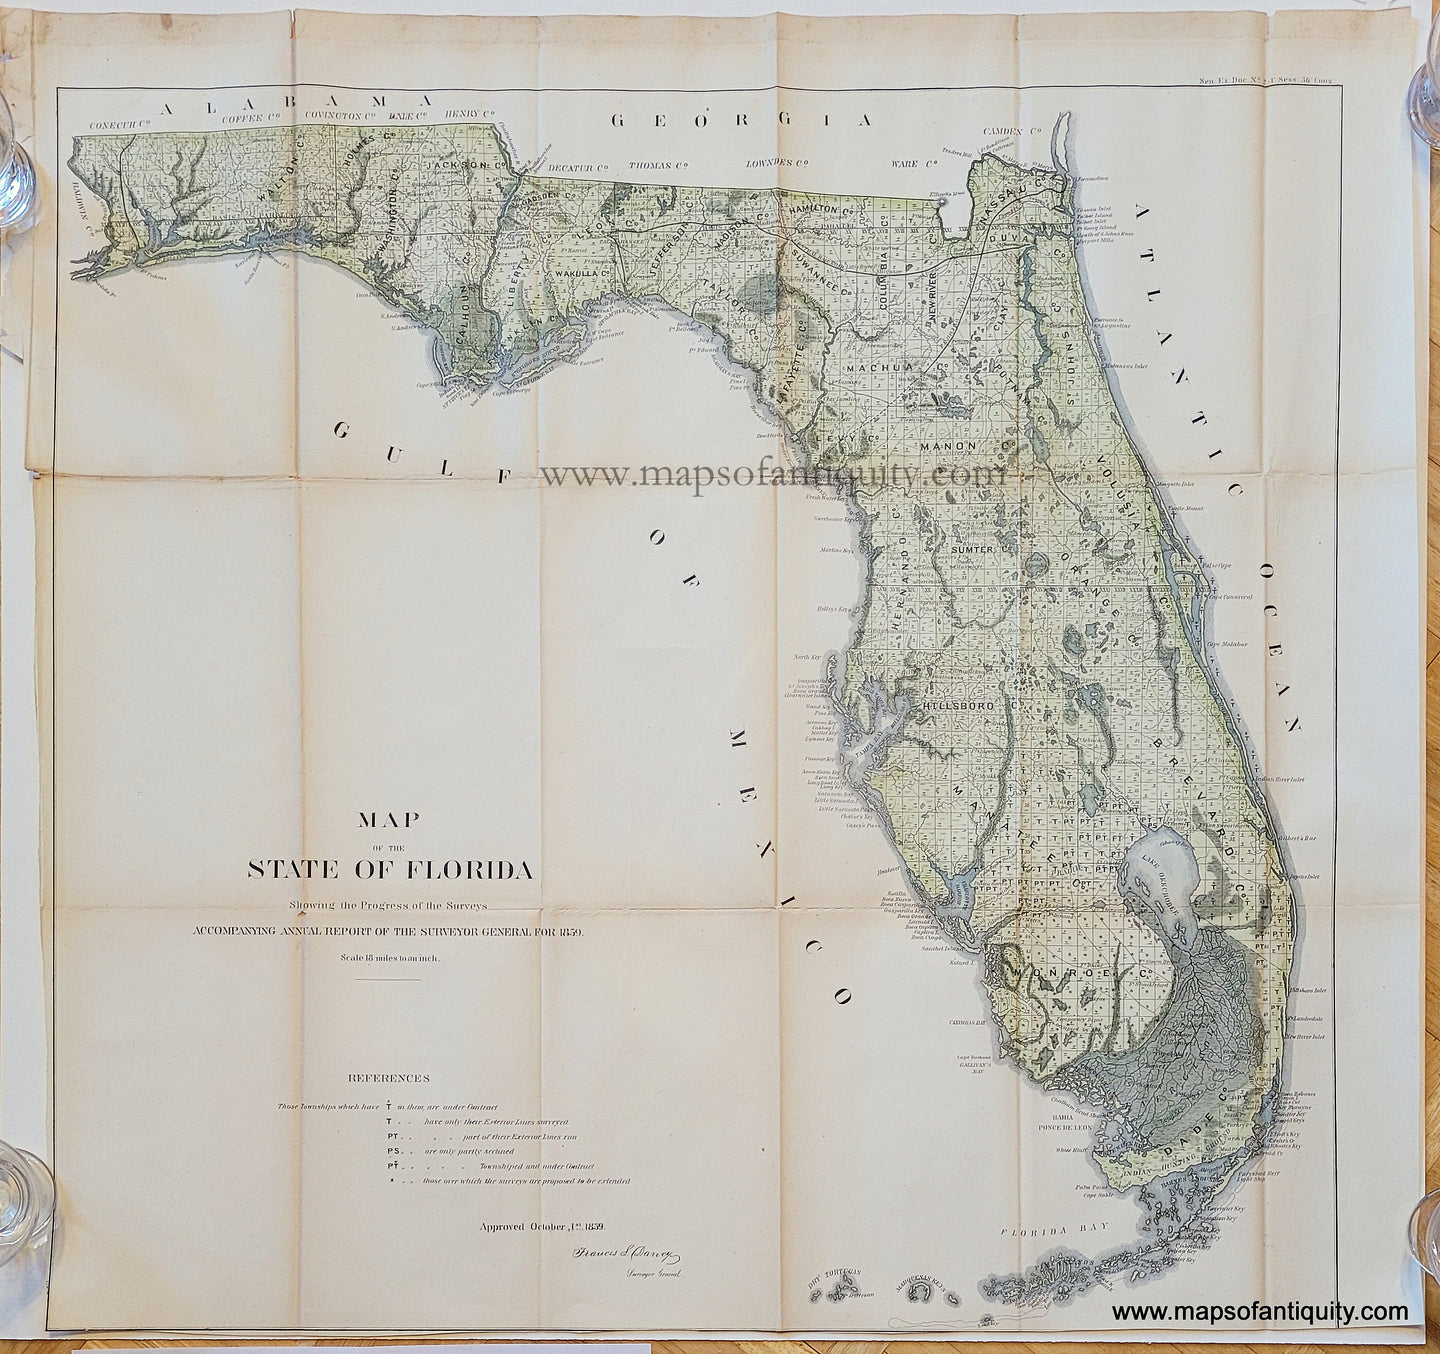 Genuine-Antique-Report-Map-Map-of-the-State-of-Florida-Showing-the-Progress-of-the-Surveys-1859-USCS-Maps-Of-Antiquity